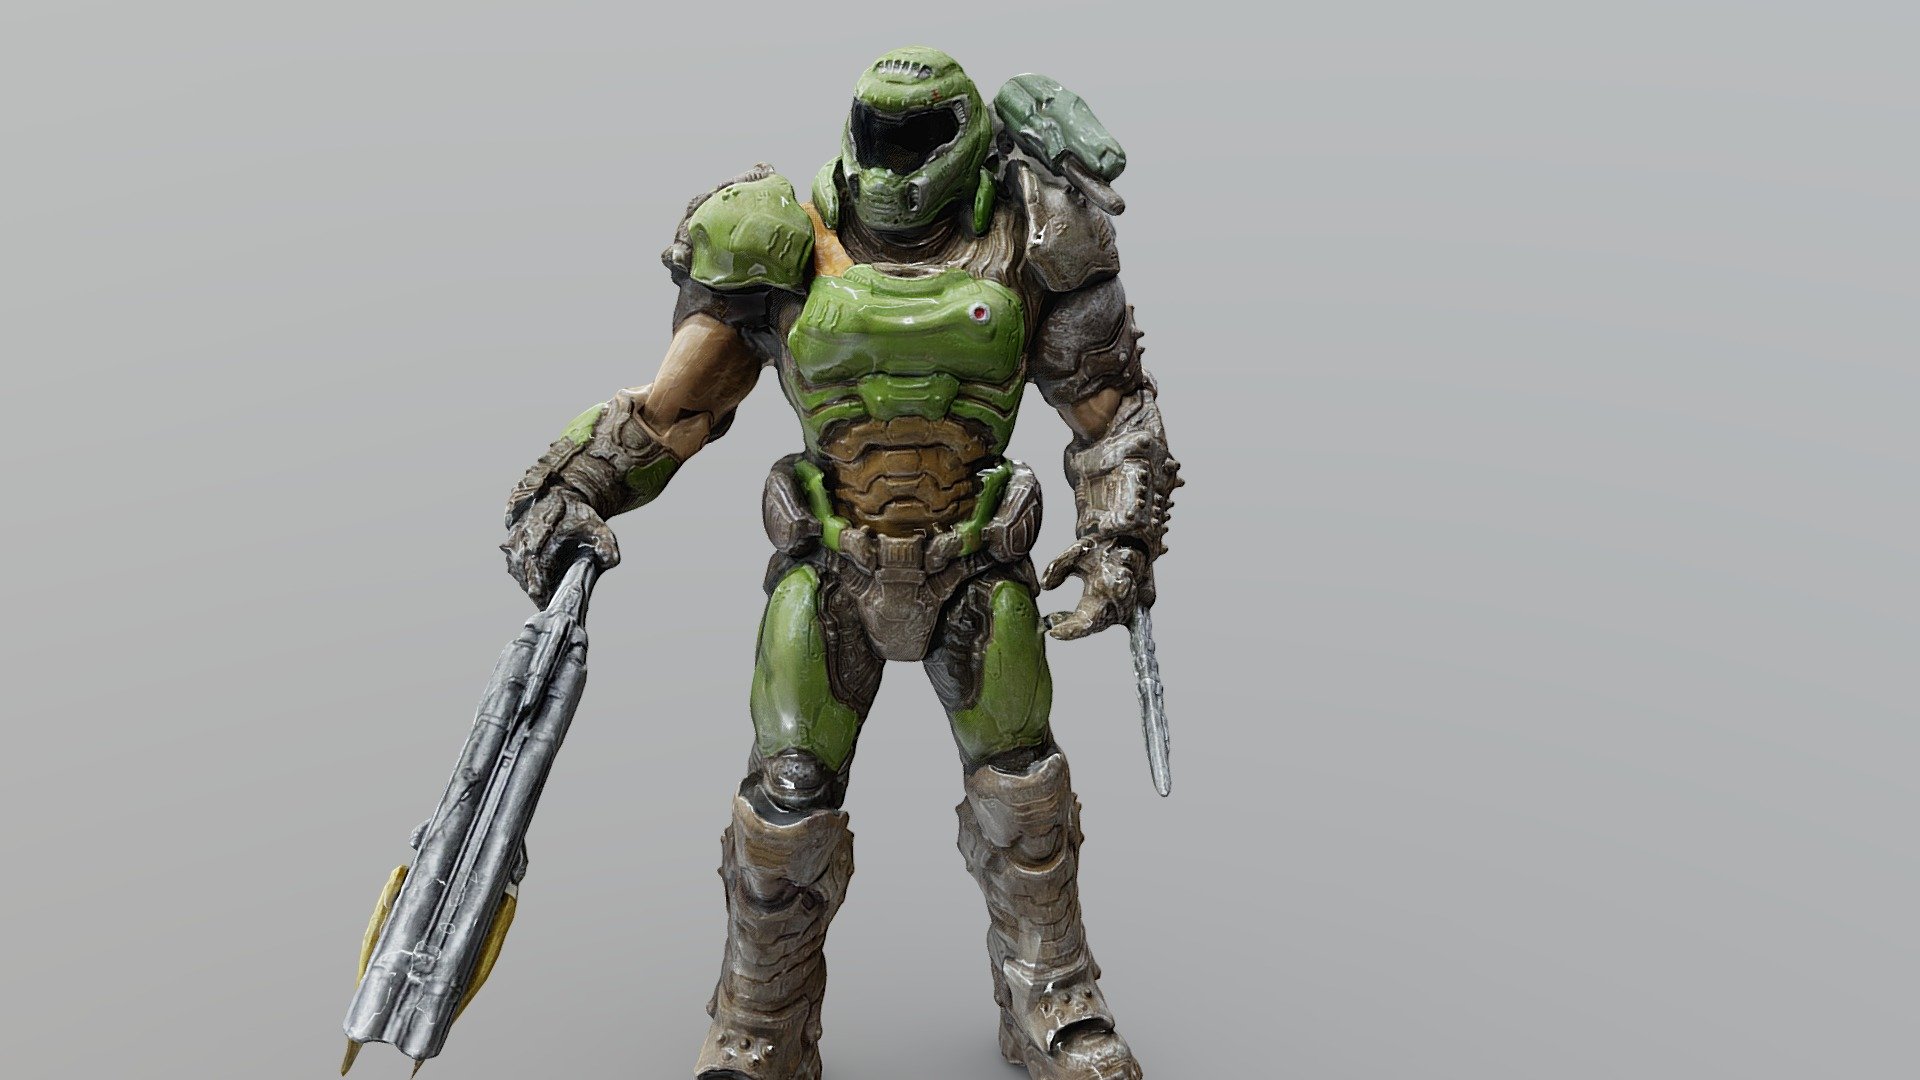 Full model of the Doom Slayer from the video game Doom Eternal! - Doom Slayer - Doom Eternal Model - 3D model by MetalArcade 3d model